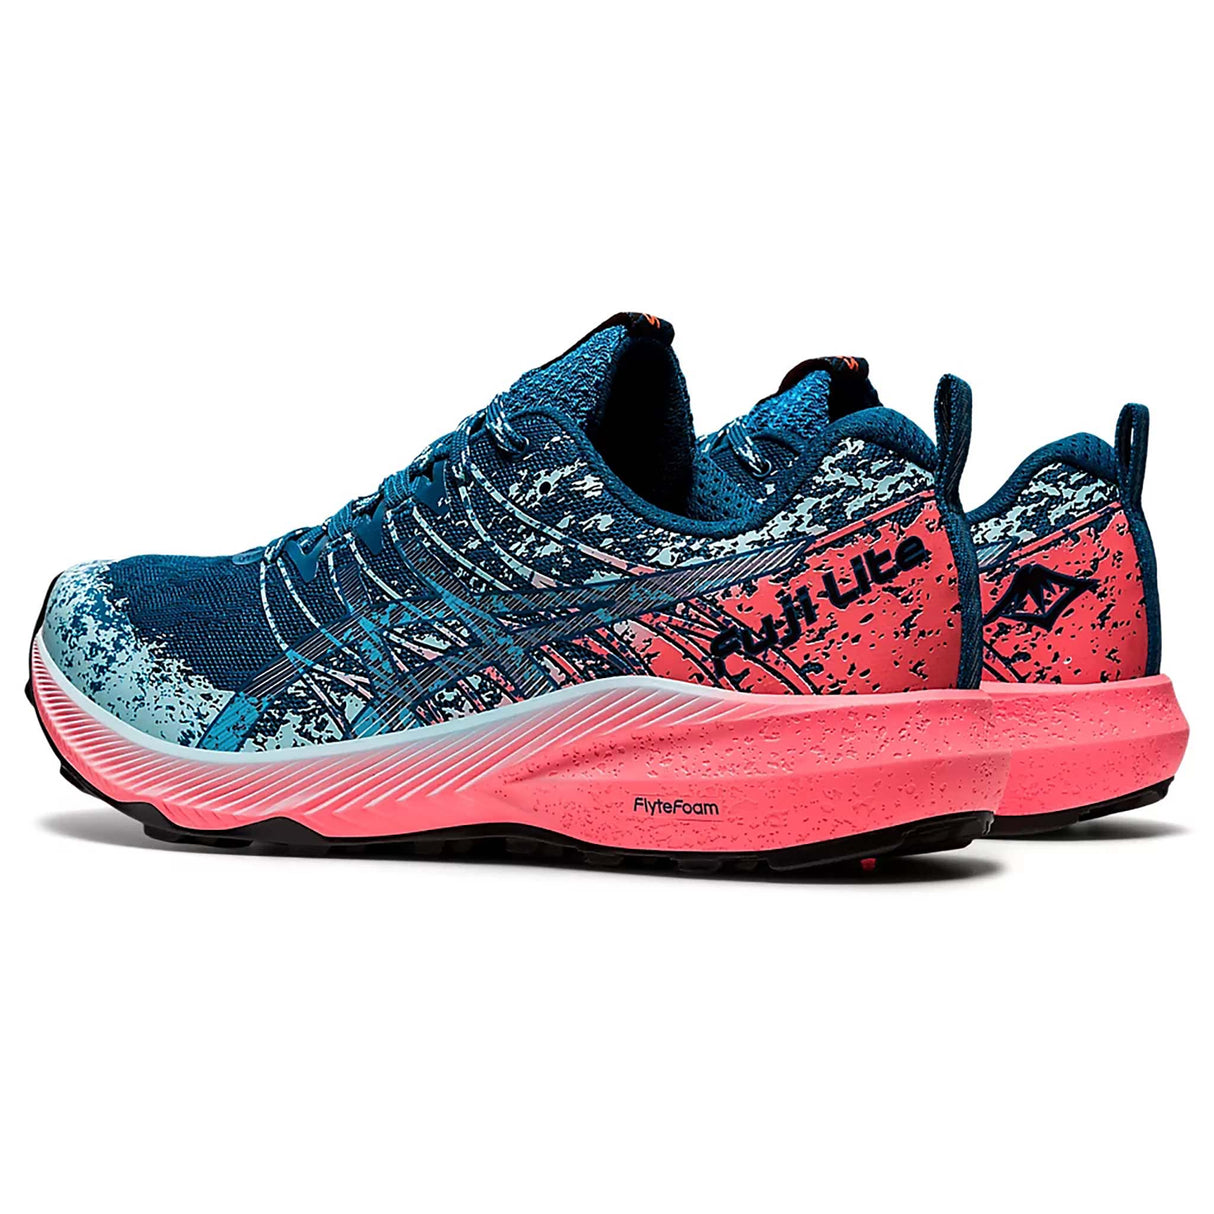 ASICS Fuji Lite 2 running femme teal silver paire lateral